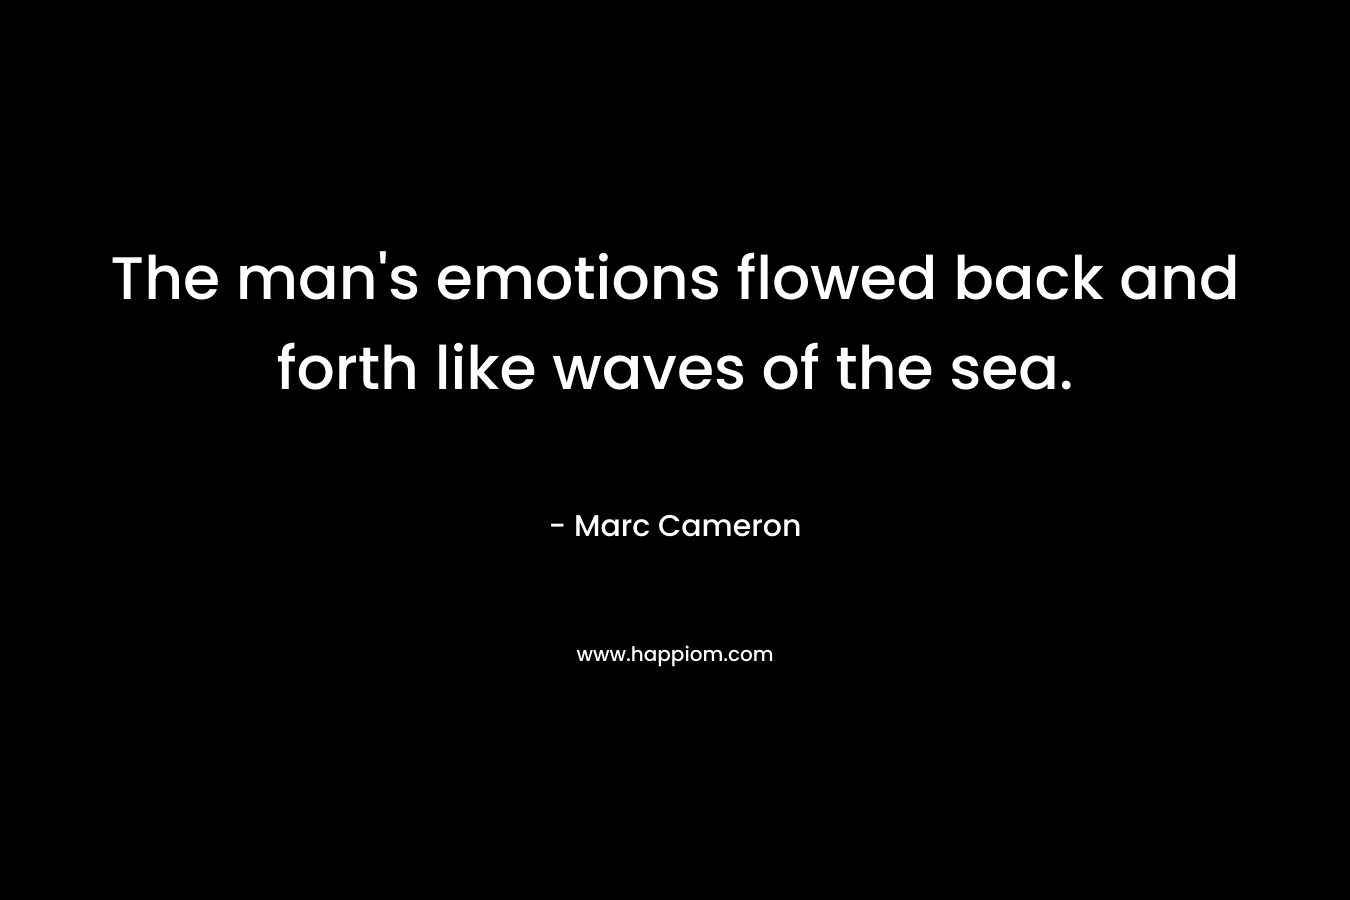 The man’s emotions flowed back and forth like waves of the sea. – Marc Cameron